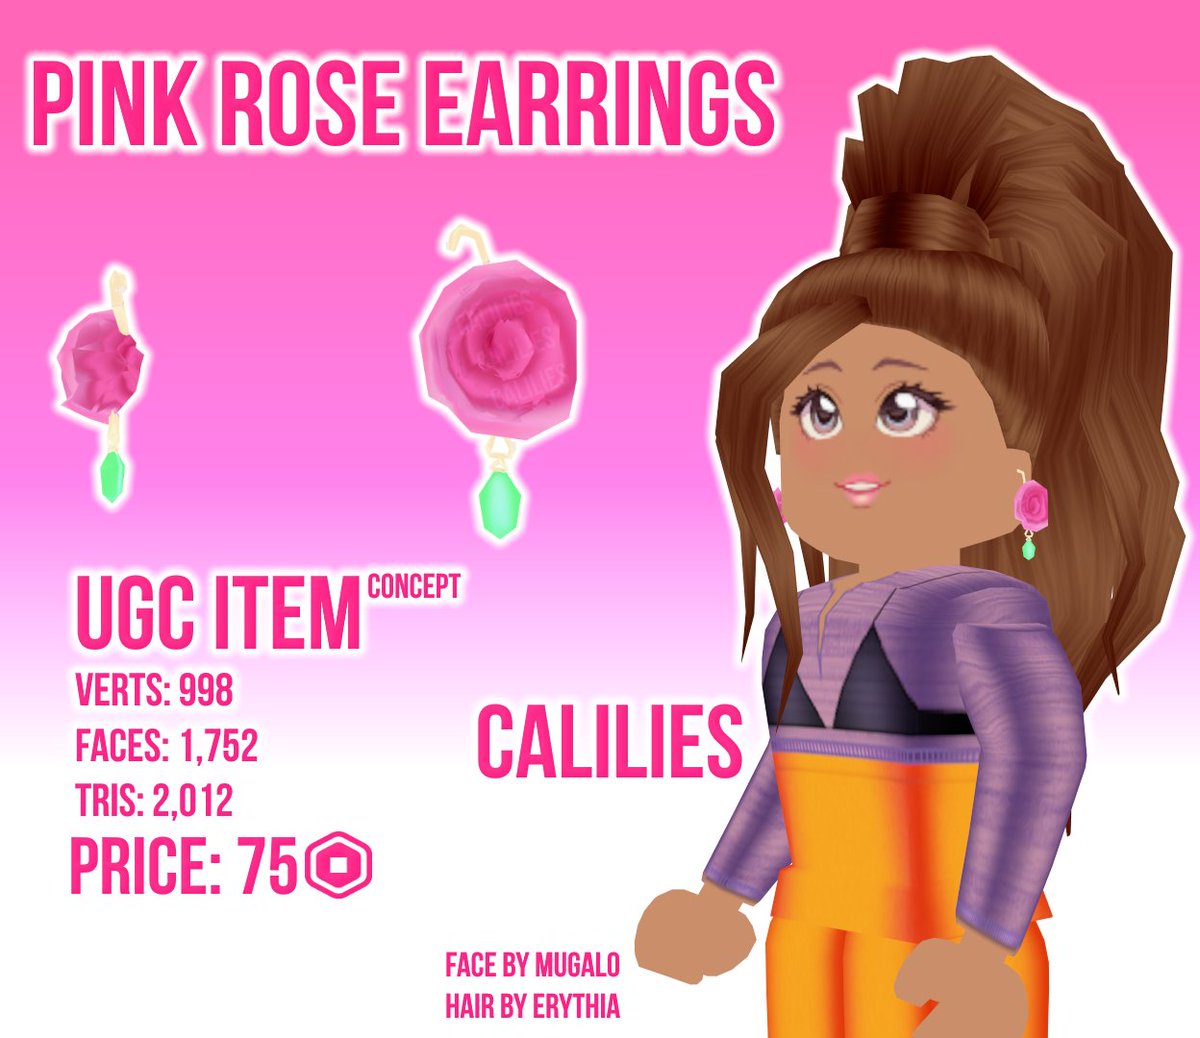 Calilies On Twitter Ugc Concept Pink Rose Earrings Likes Retweets Appreciated Roblox Profile Https T Co Jhtaopynhx Roblox Robloxdev Robloxugc Robloxdevrel Roblox Https T Co 0xobfgbglz - mugalo roblox faces